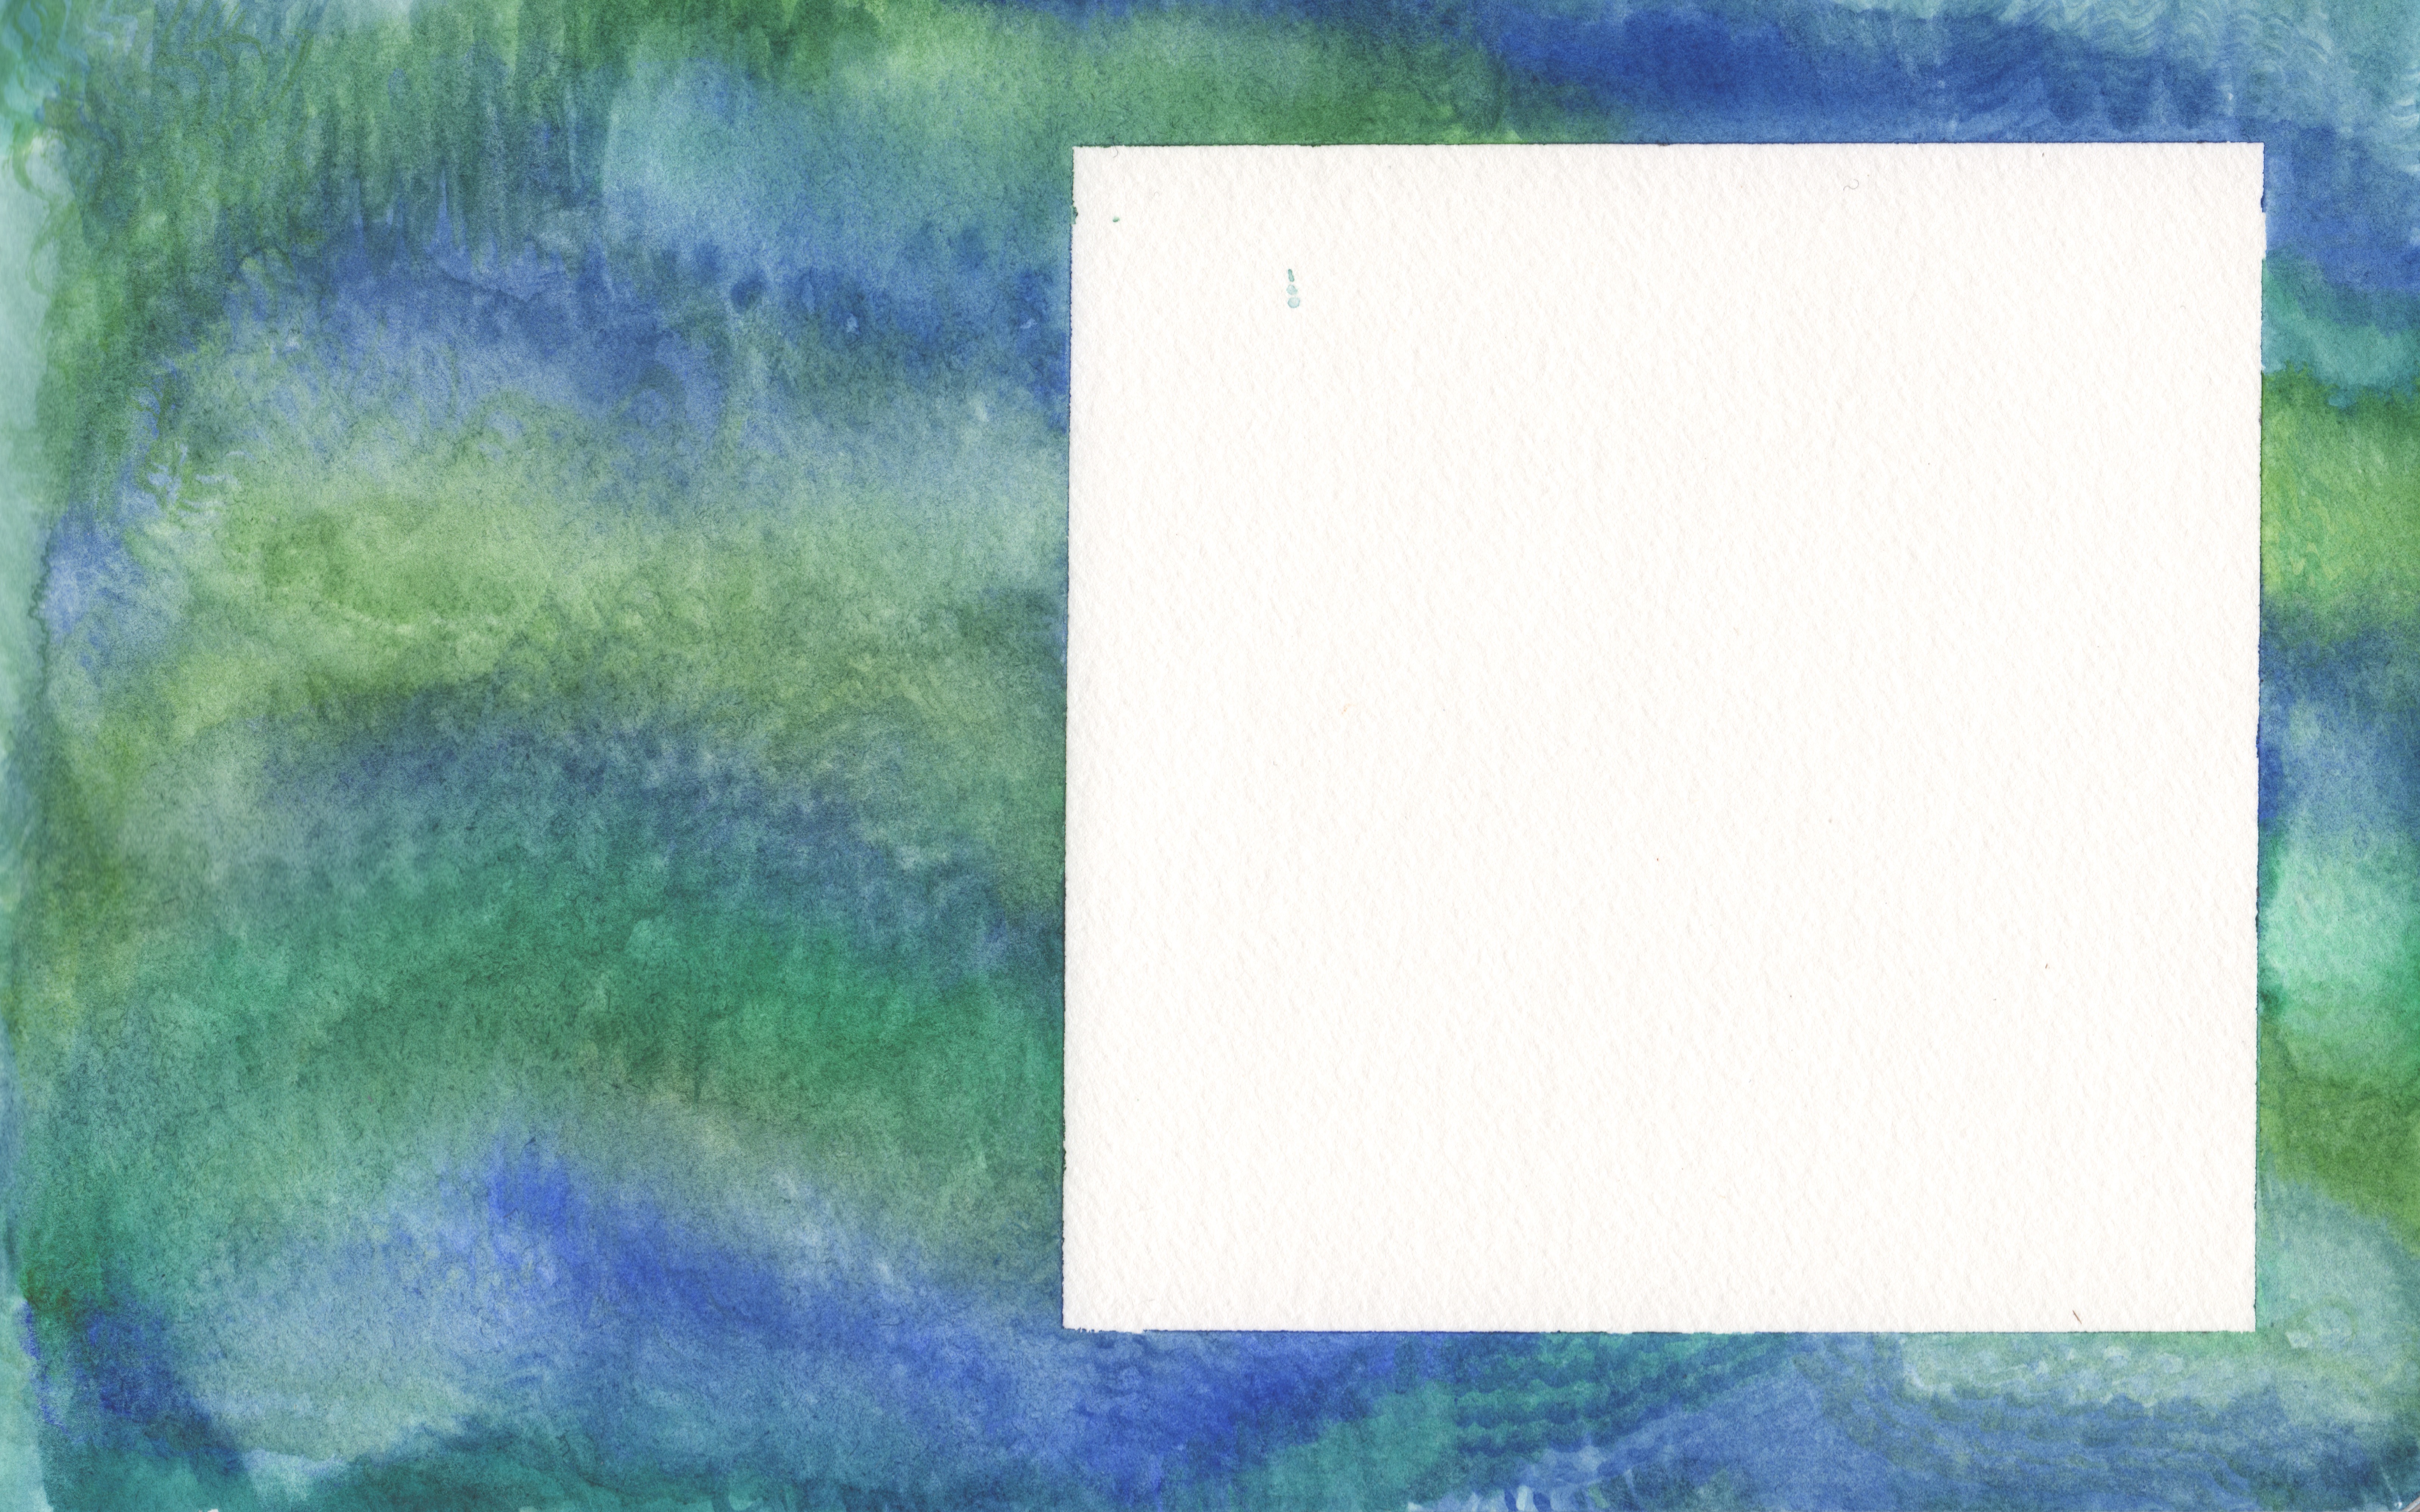 Watercolor data viz representing no visualization on a background of blues and greens.